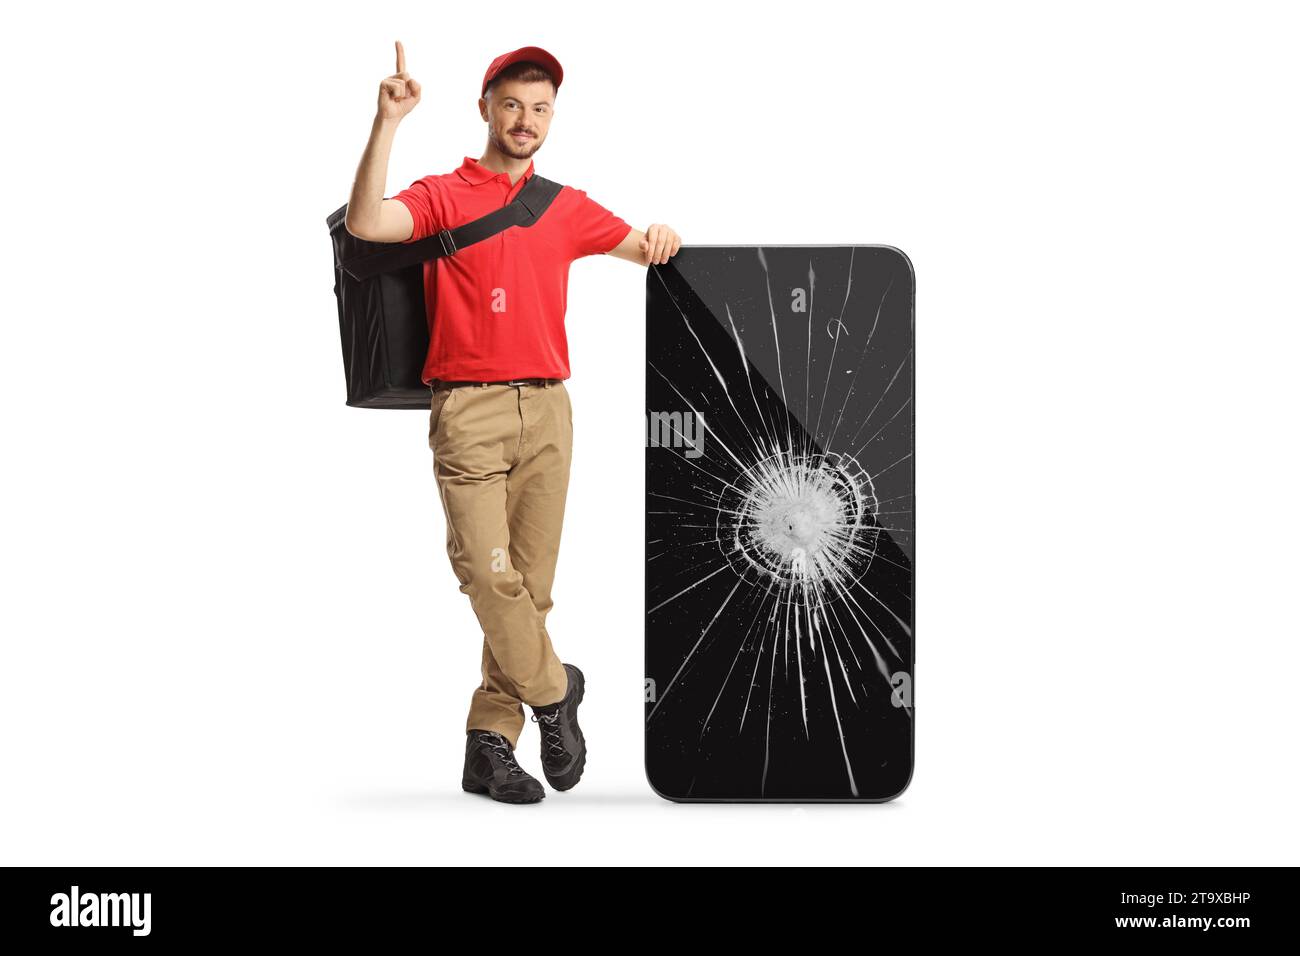 Delivery man leaning on a smartphone with a broken screen and pointing up isolated on white background Stock Photo